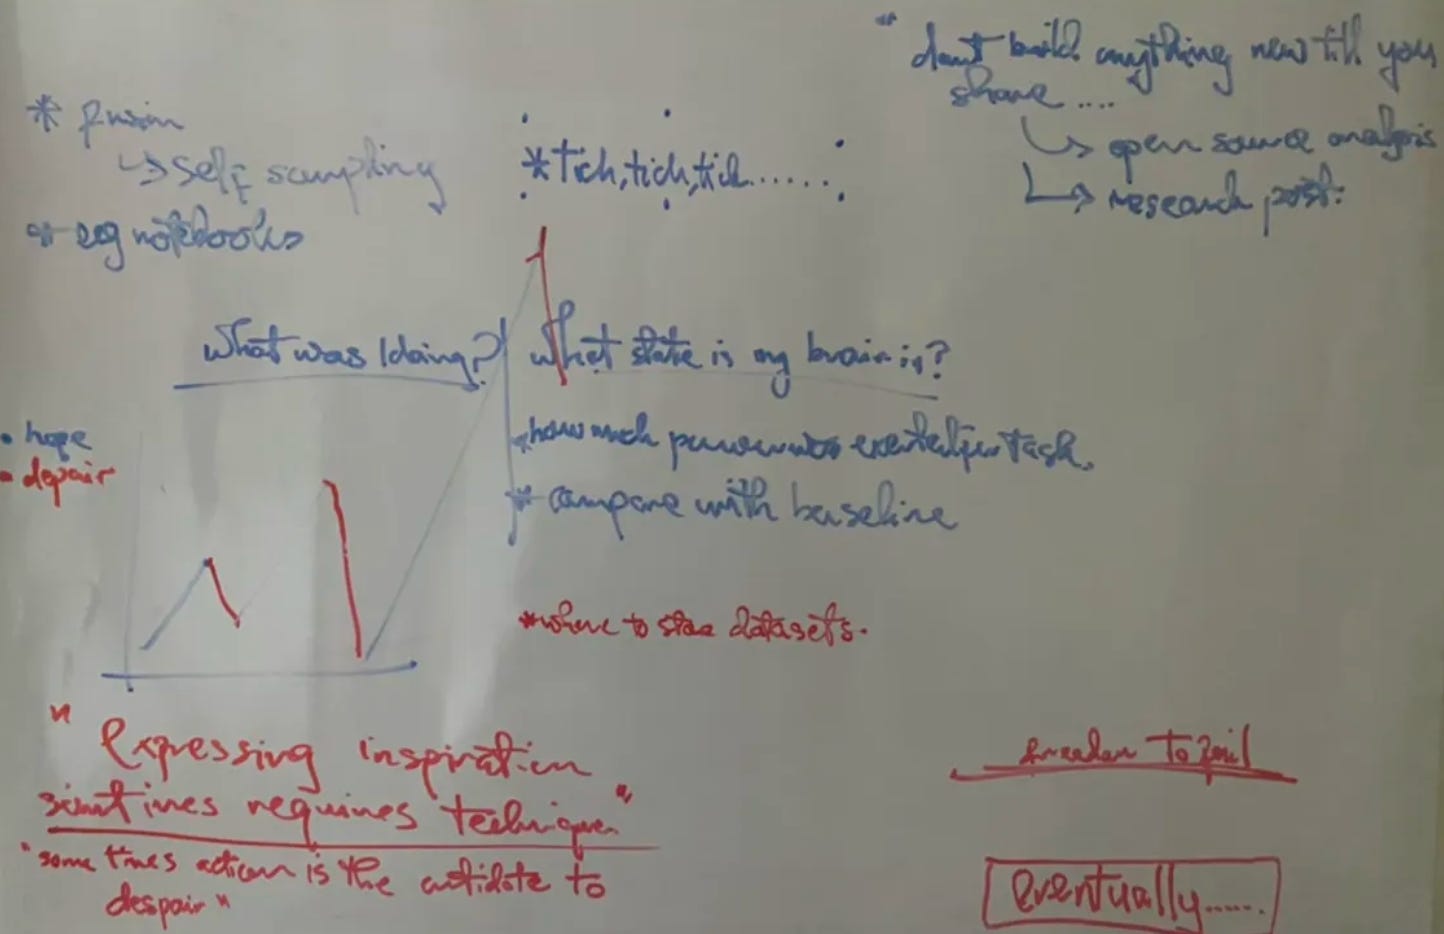 Picture of whiteboard in Ore's lab